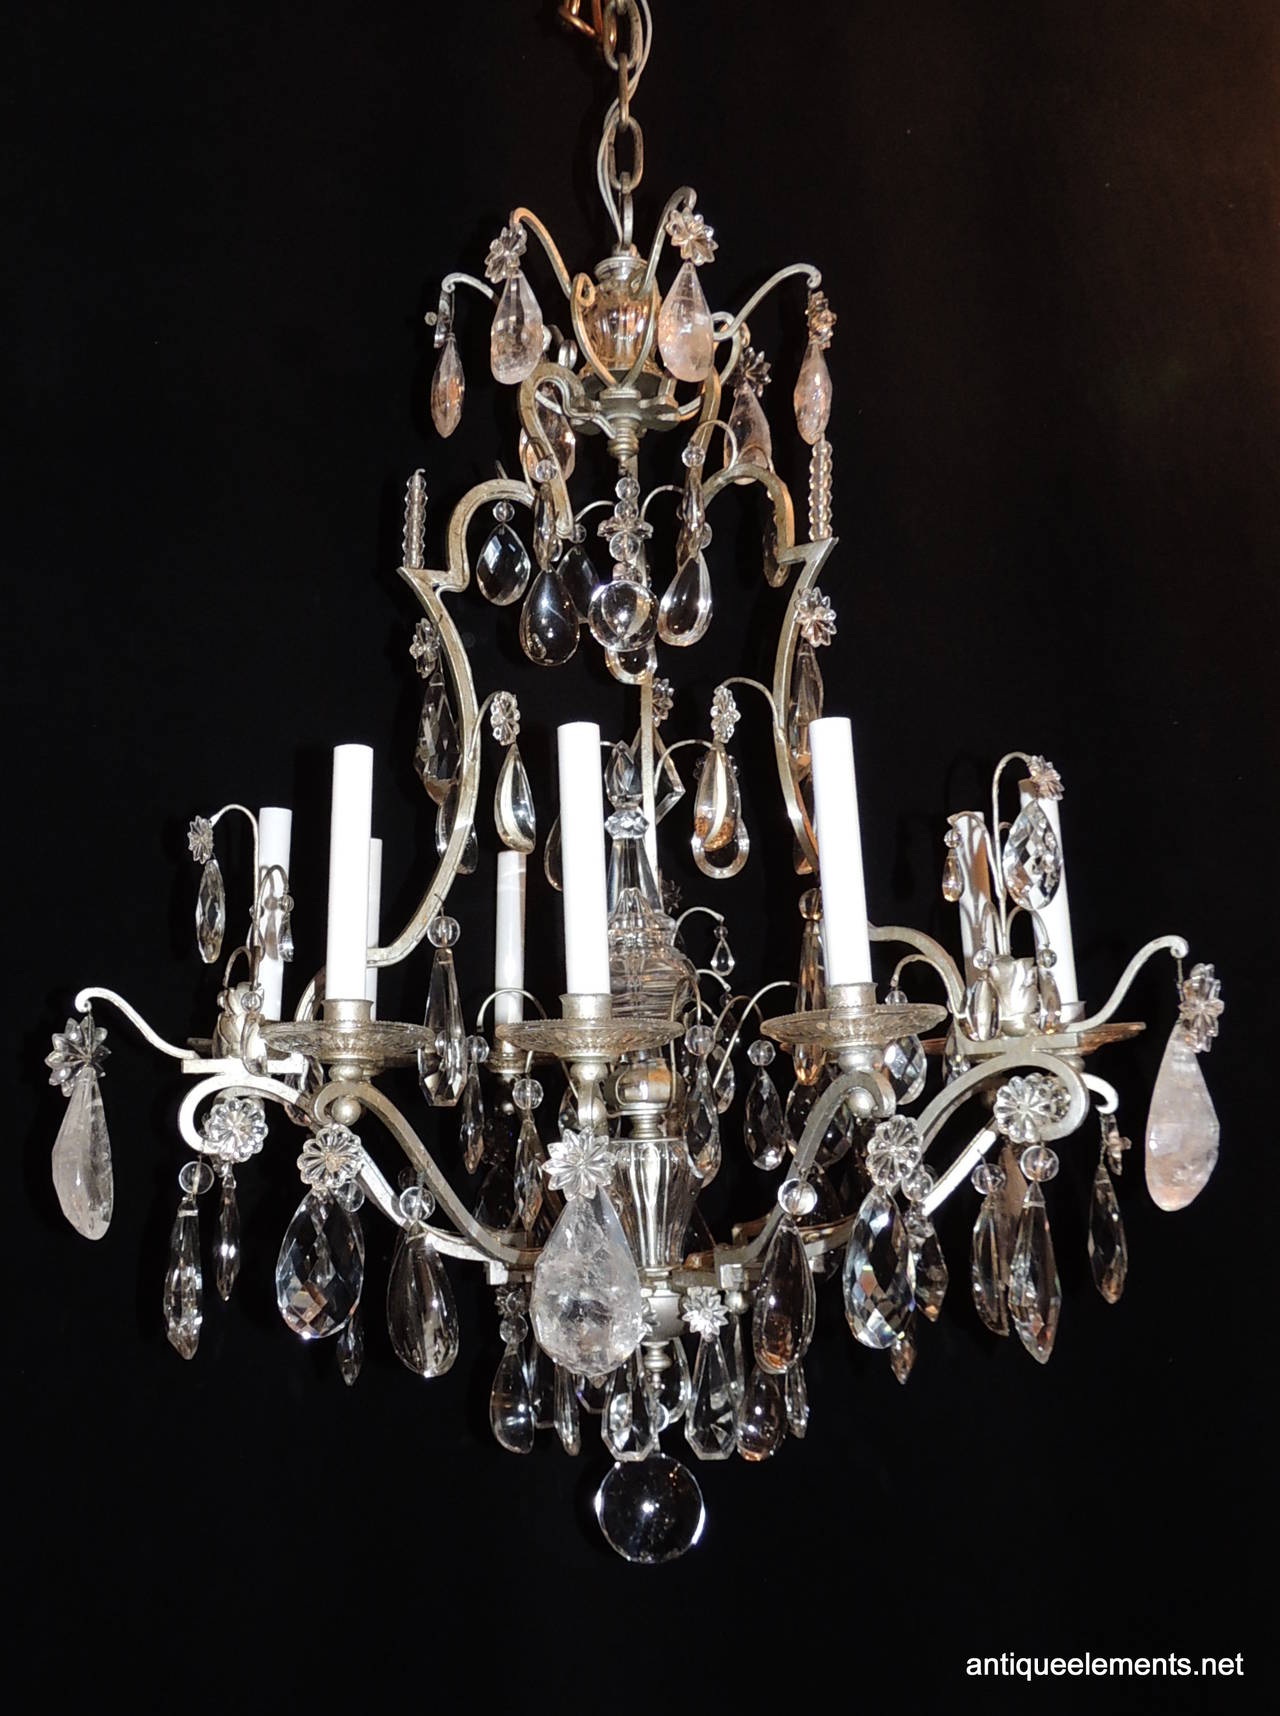 An original Bagues nine-light chandelier with silvered gilt bronze and rock crystal.
The detail of diamond prism, rock crystal and flat back crystal throughout the chandelier capture the light from nine candelabra arms. A wonderful centre crystal